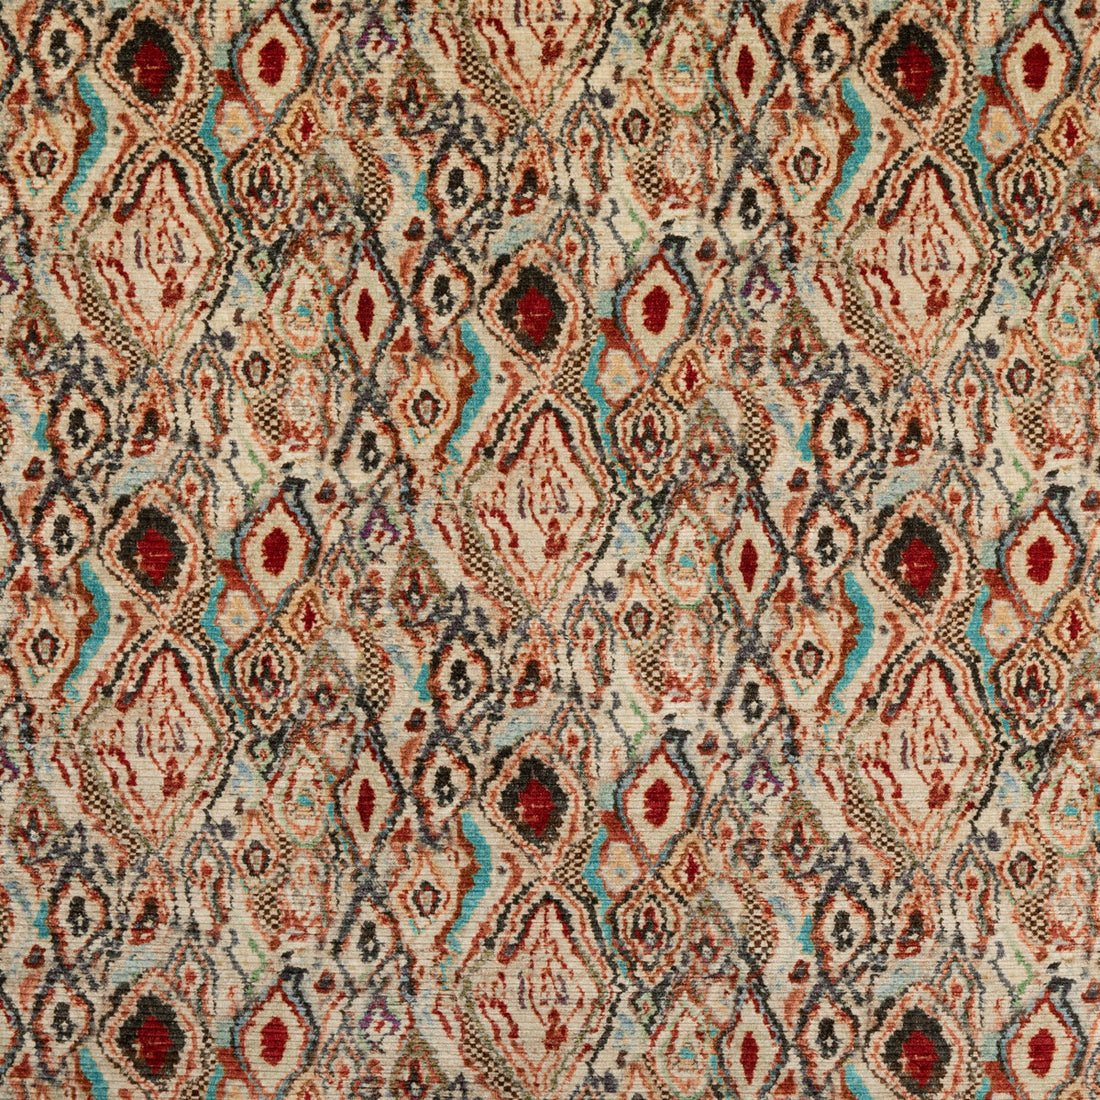 Paint Box fabric in teal/spice color - pattern FD313.T69.0 - by Mulberry in the Modern Country Velvets collection